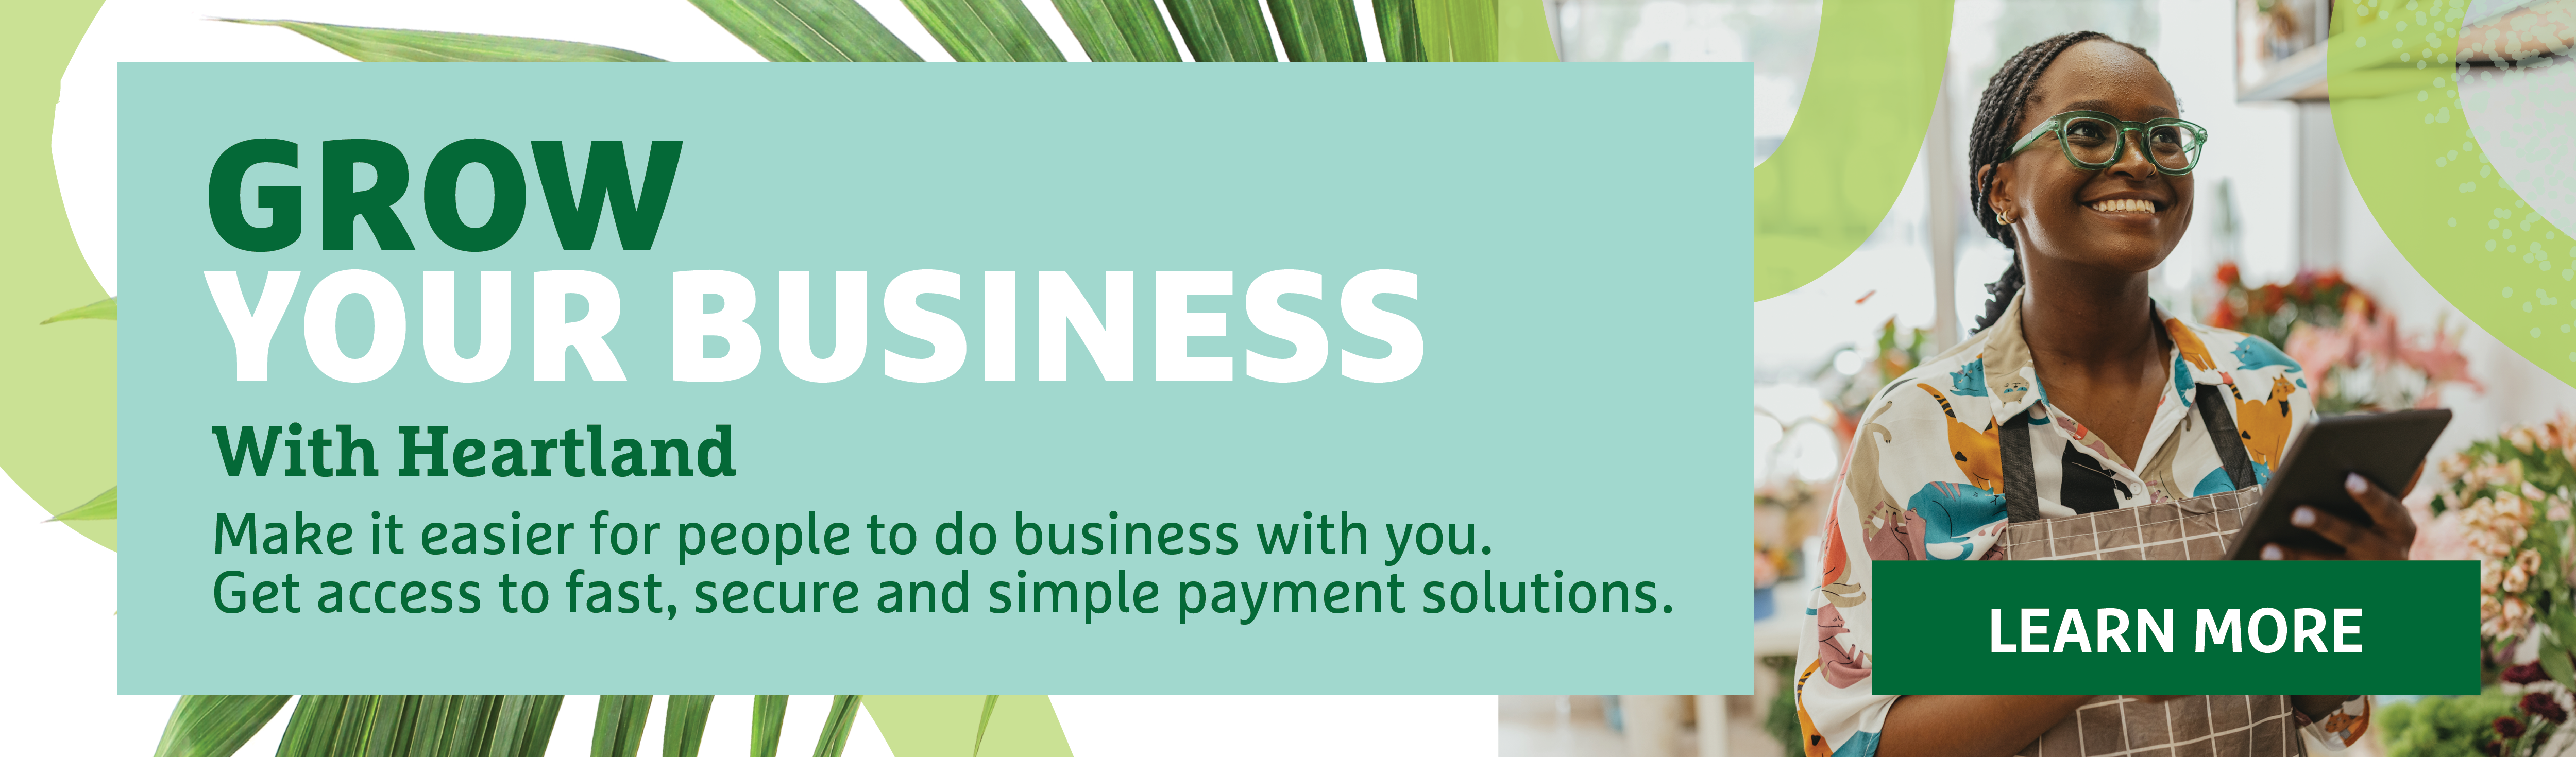 Grow Your Business with Heartland. Make it easier for people to do business with you. Get access to fast, secure and simple payment solutions.